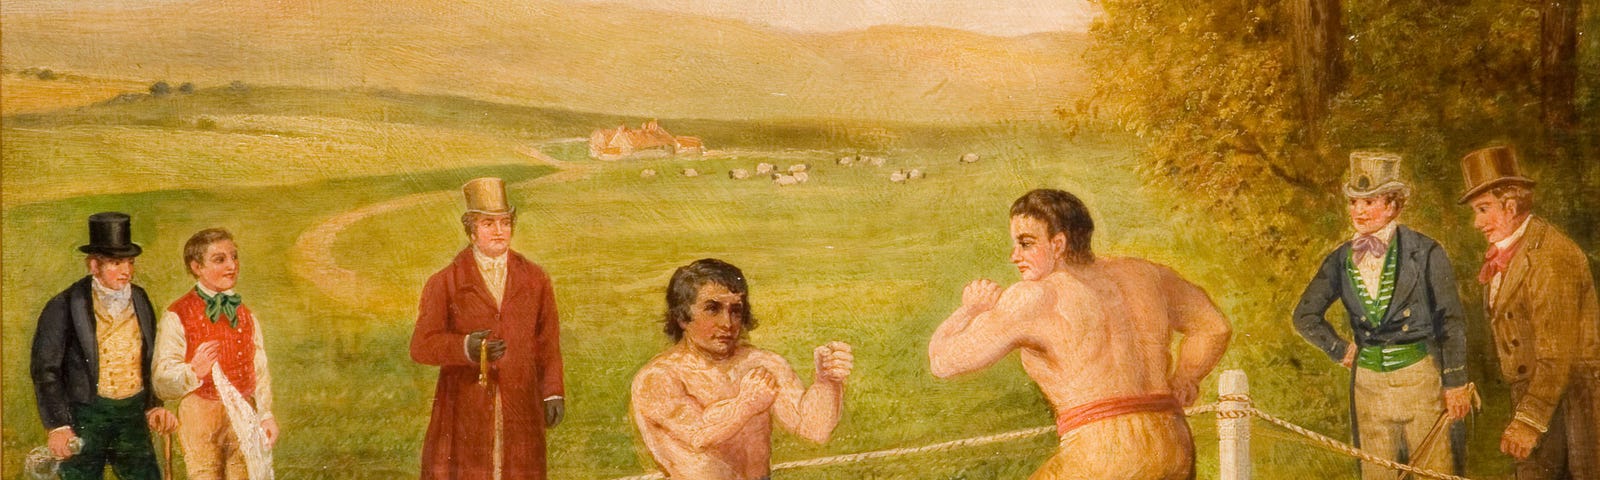 Two men boxing on a grassy field